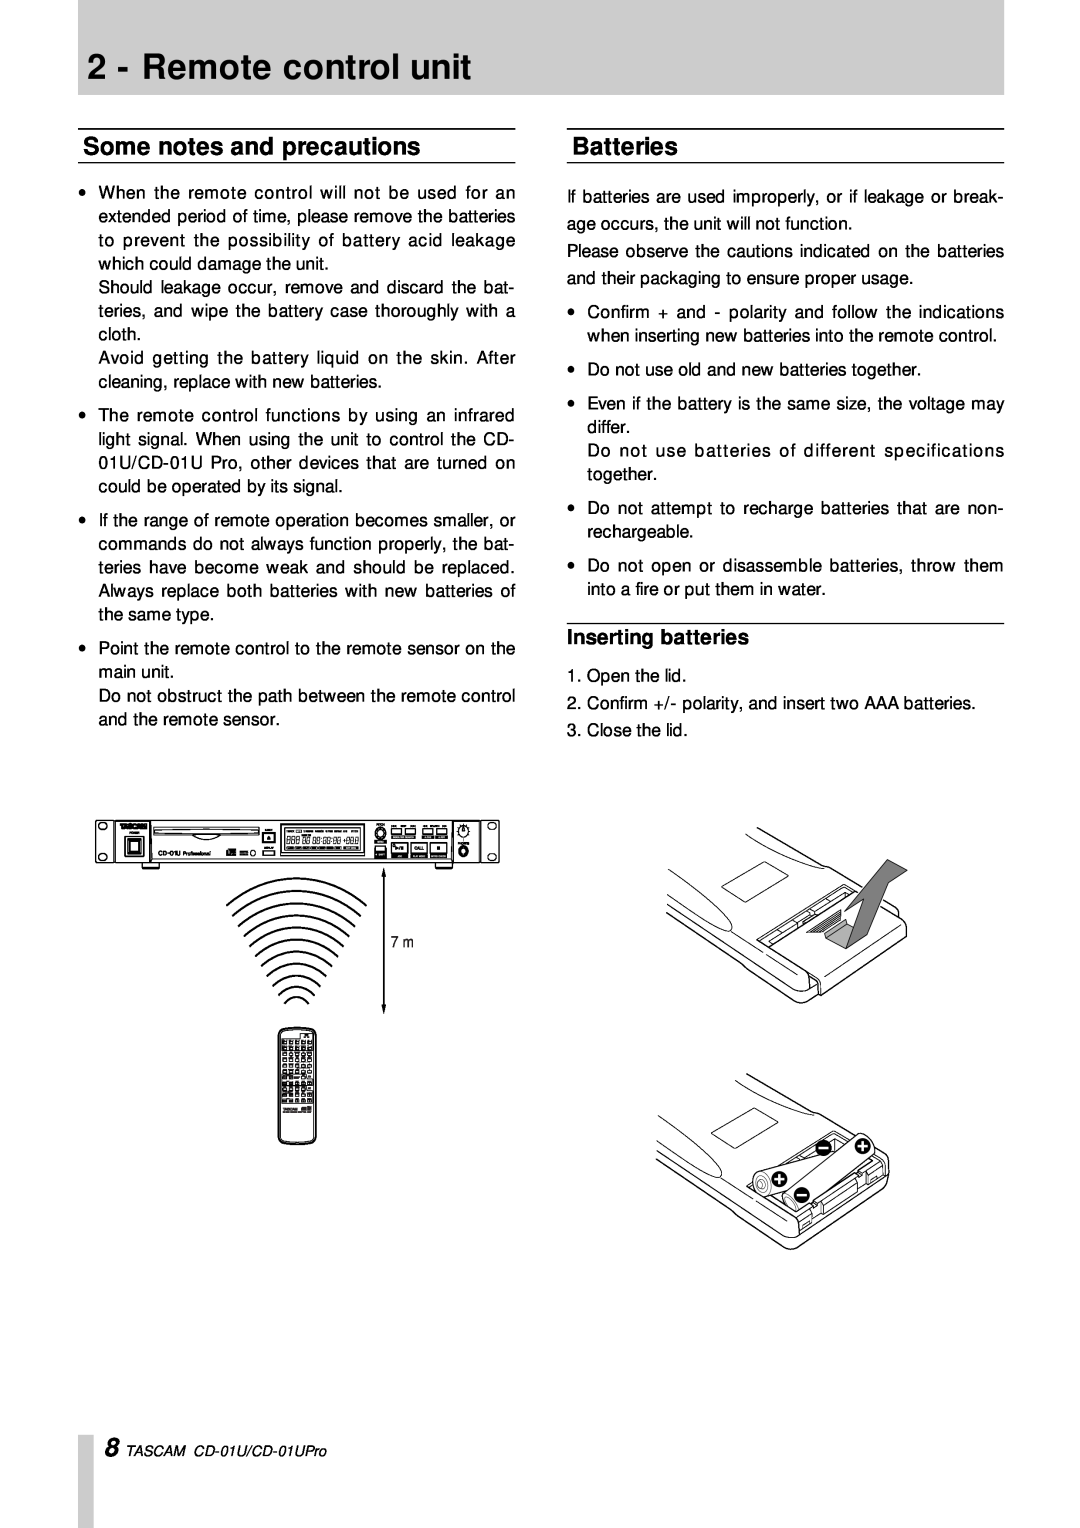 Tascam CD-01 U, CD-01UPro owner manual Remote control unit, Some notes and precautions, Batteries, Inserting batteries 